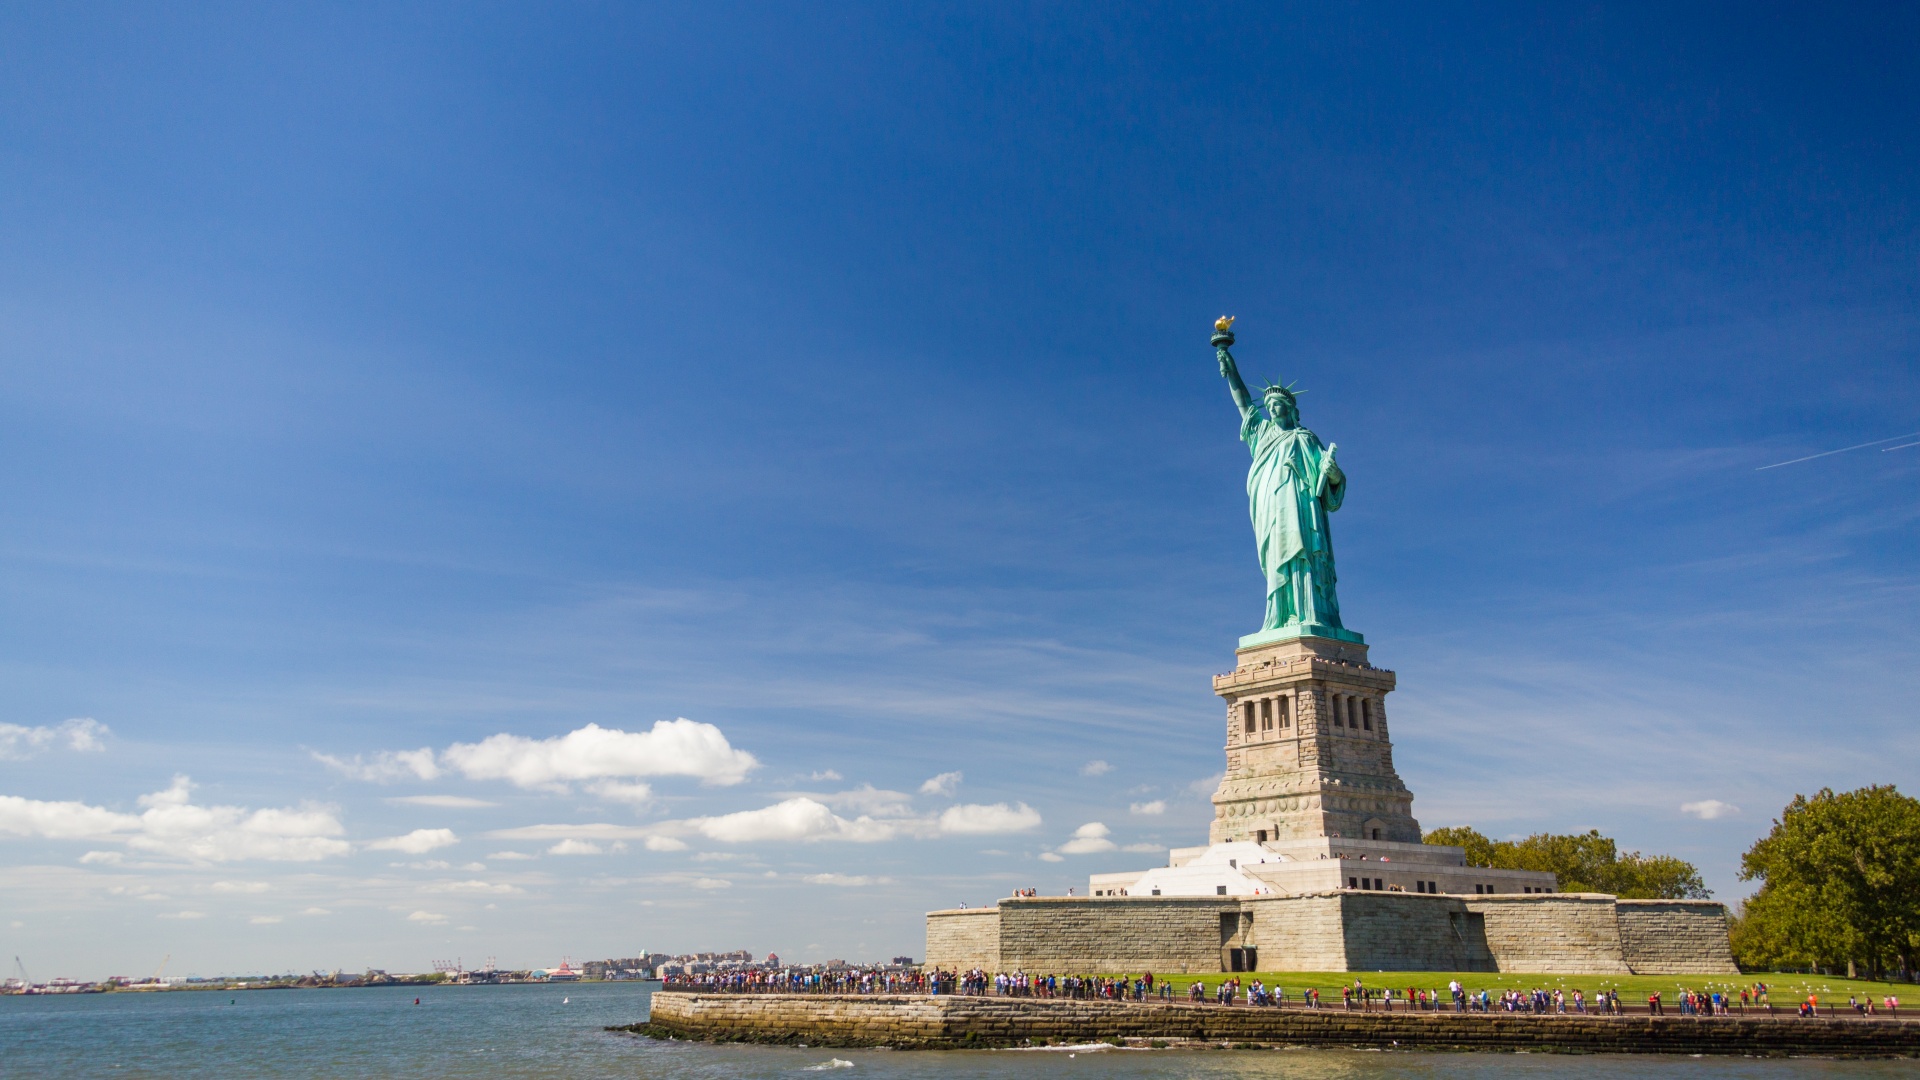 The Best Places to Take Photos of the Statue of Liberty - Bold Tourist